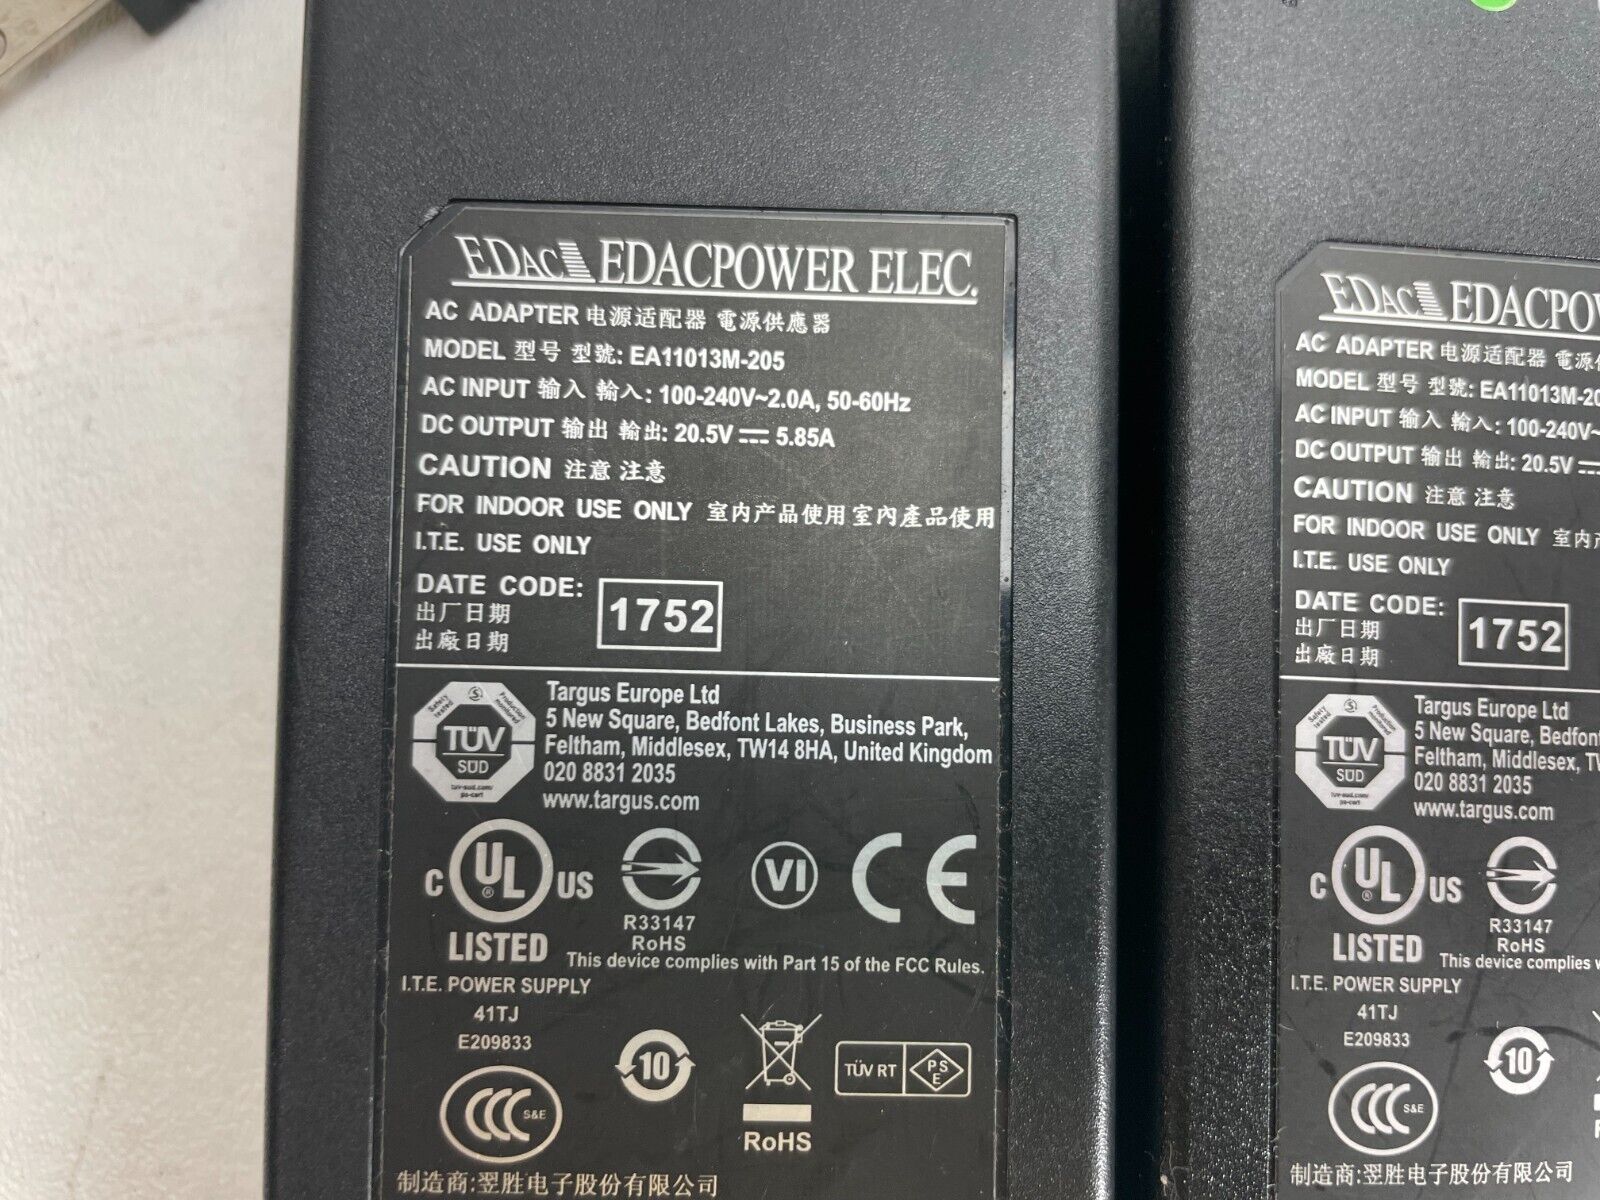 EDAC Power AC Adapter EA11013M-205 input 100-240V output 20.5V-5.85A Brand Edac Type Adapter Color Black Features Power - Click Image to Close